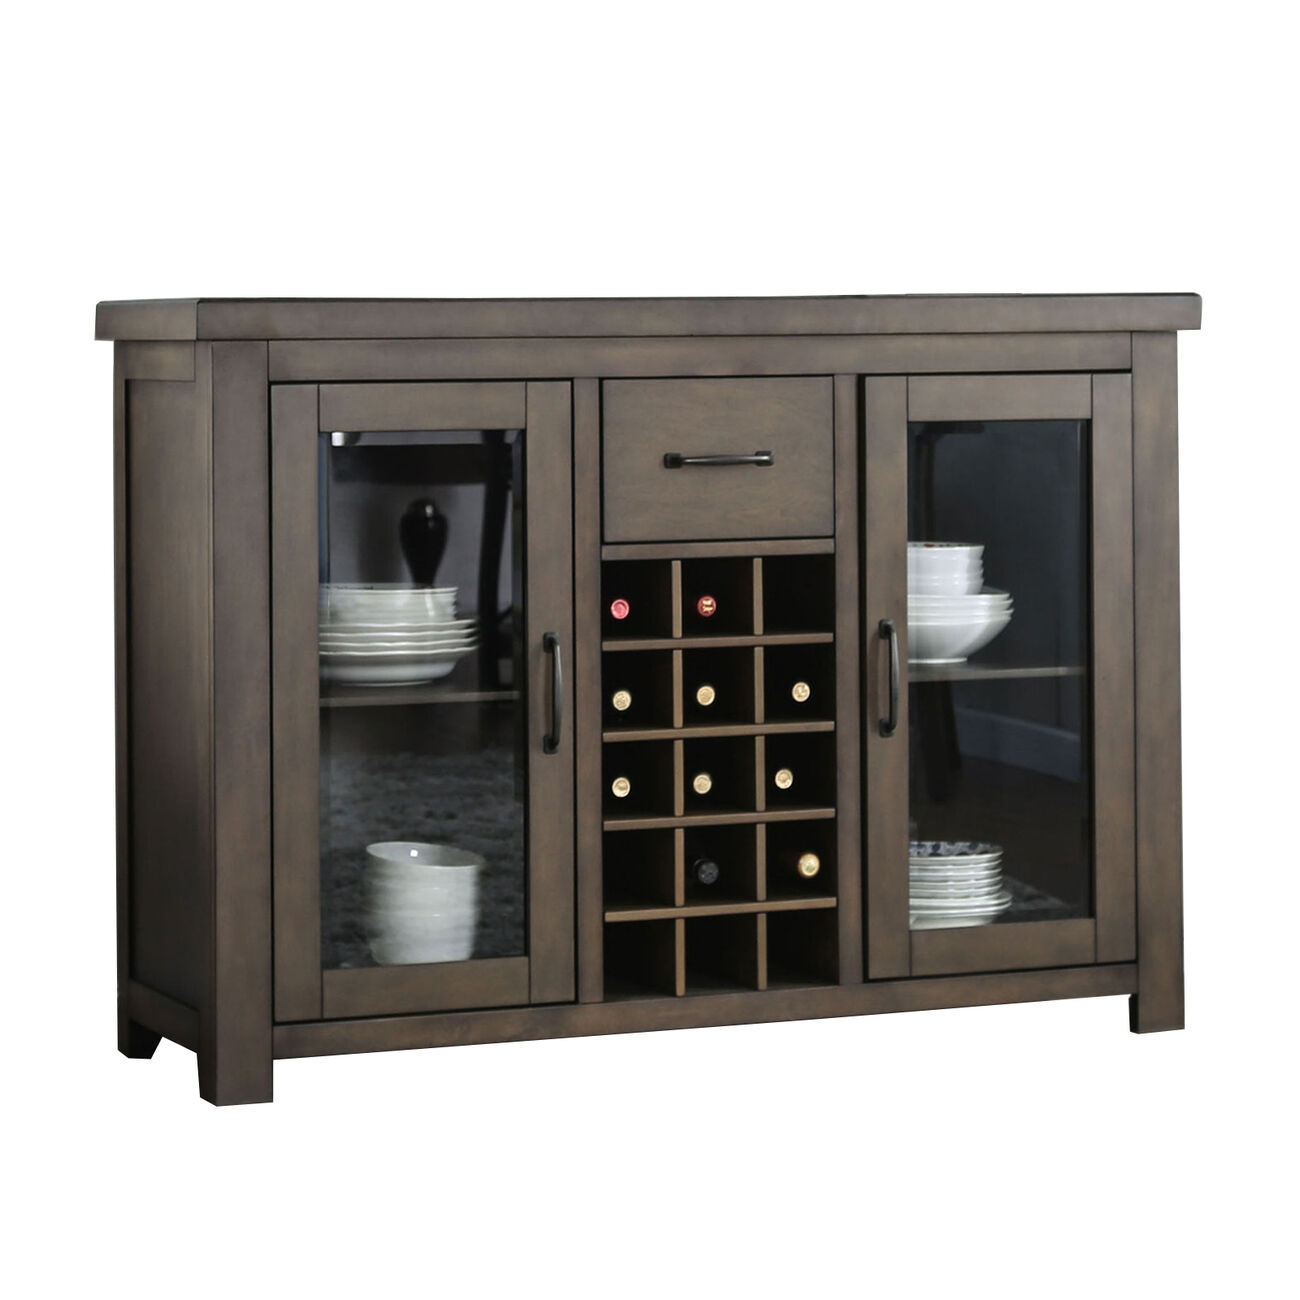 Wooden Server in with Storage Cabinets and Wine Racks, Brown